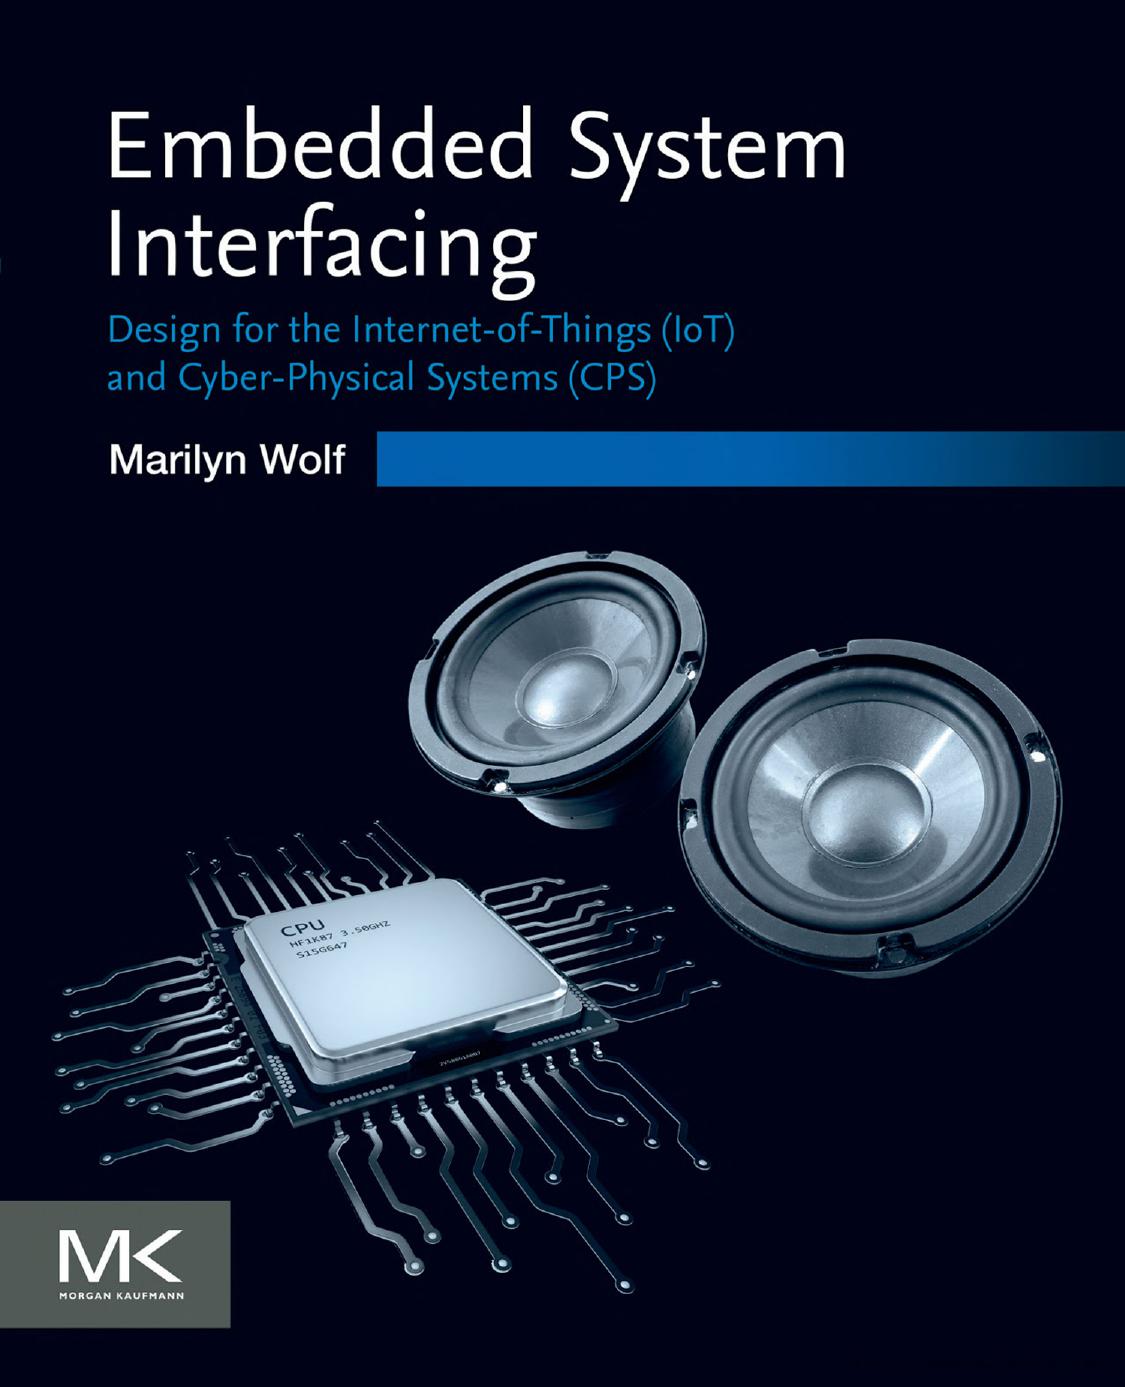 Embedded System Interfacing: Design for the Internet-Of-Things (IoT) and Cyber-Physical Systems (CPS)